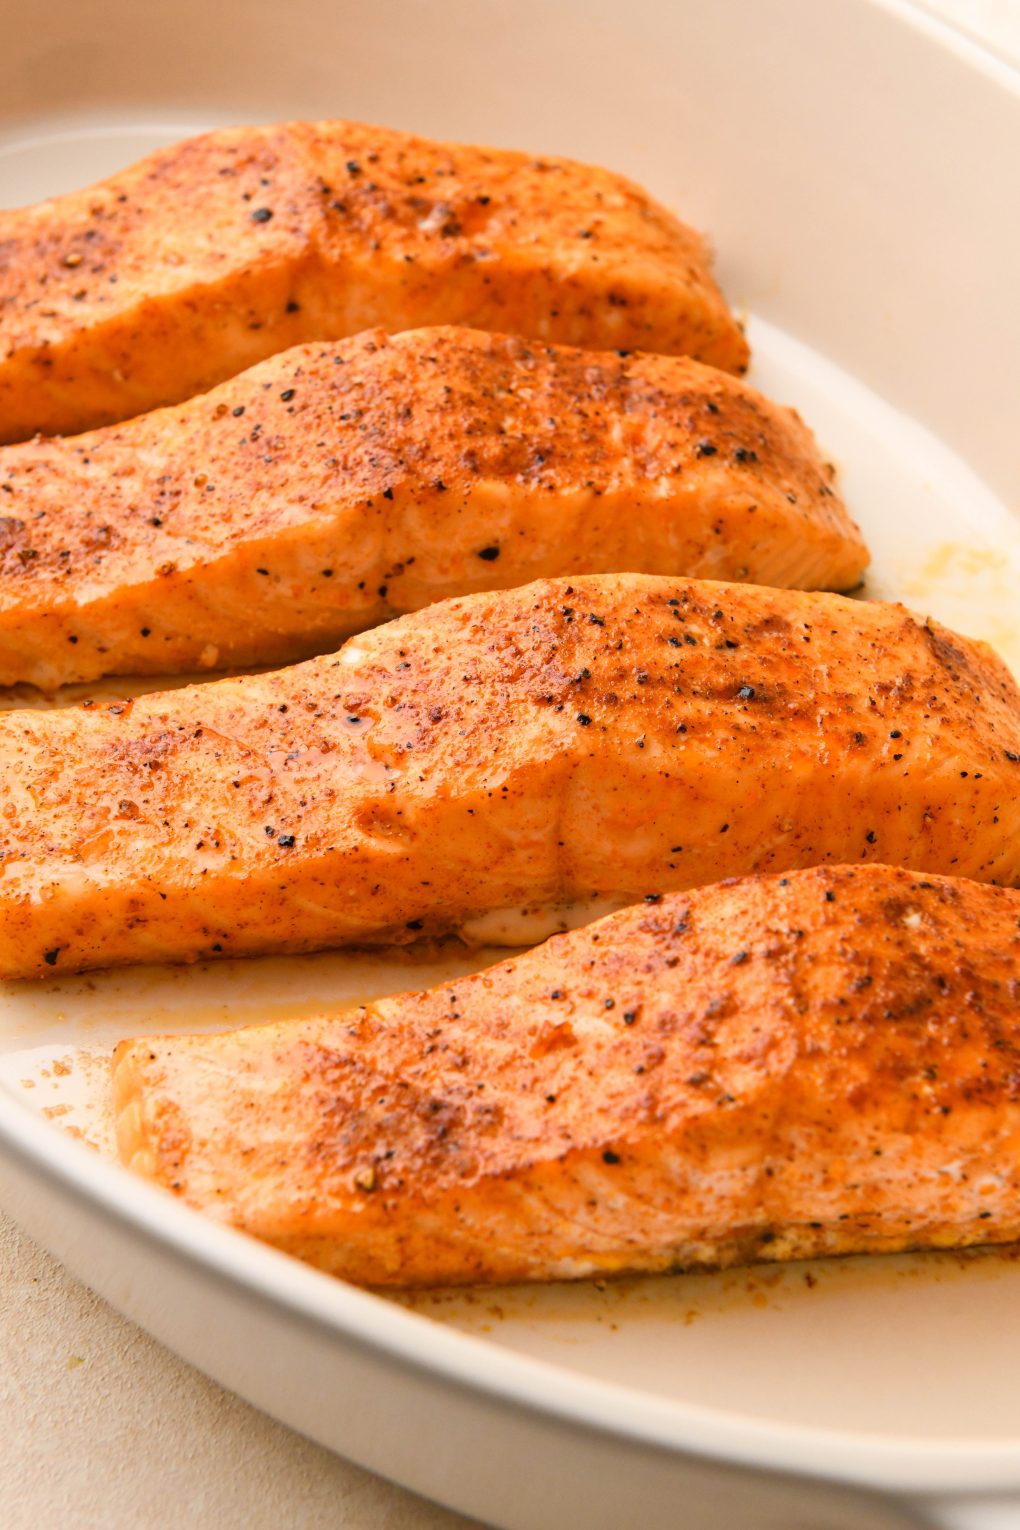 How to make maple pecan glazed salmon: Cooked seasoned salmon fillets in a ceramic baking dish. 